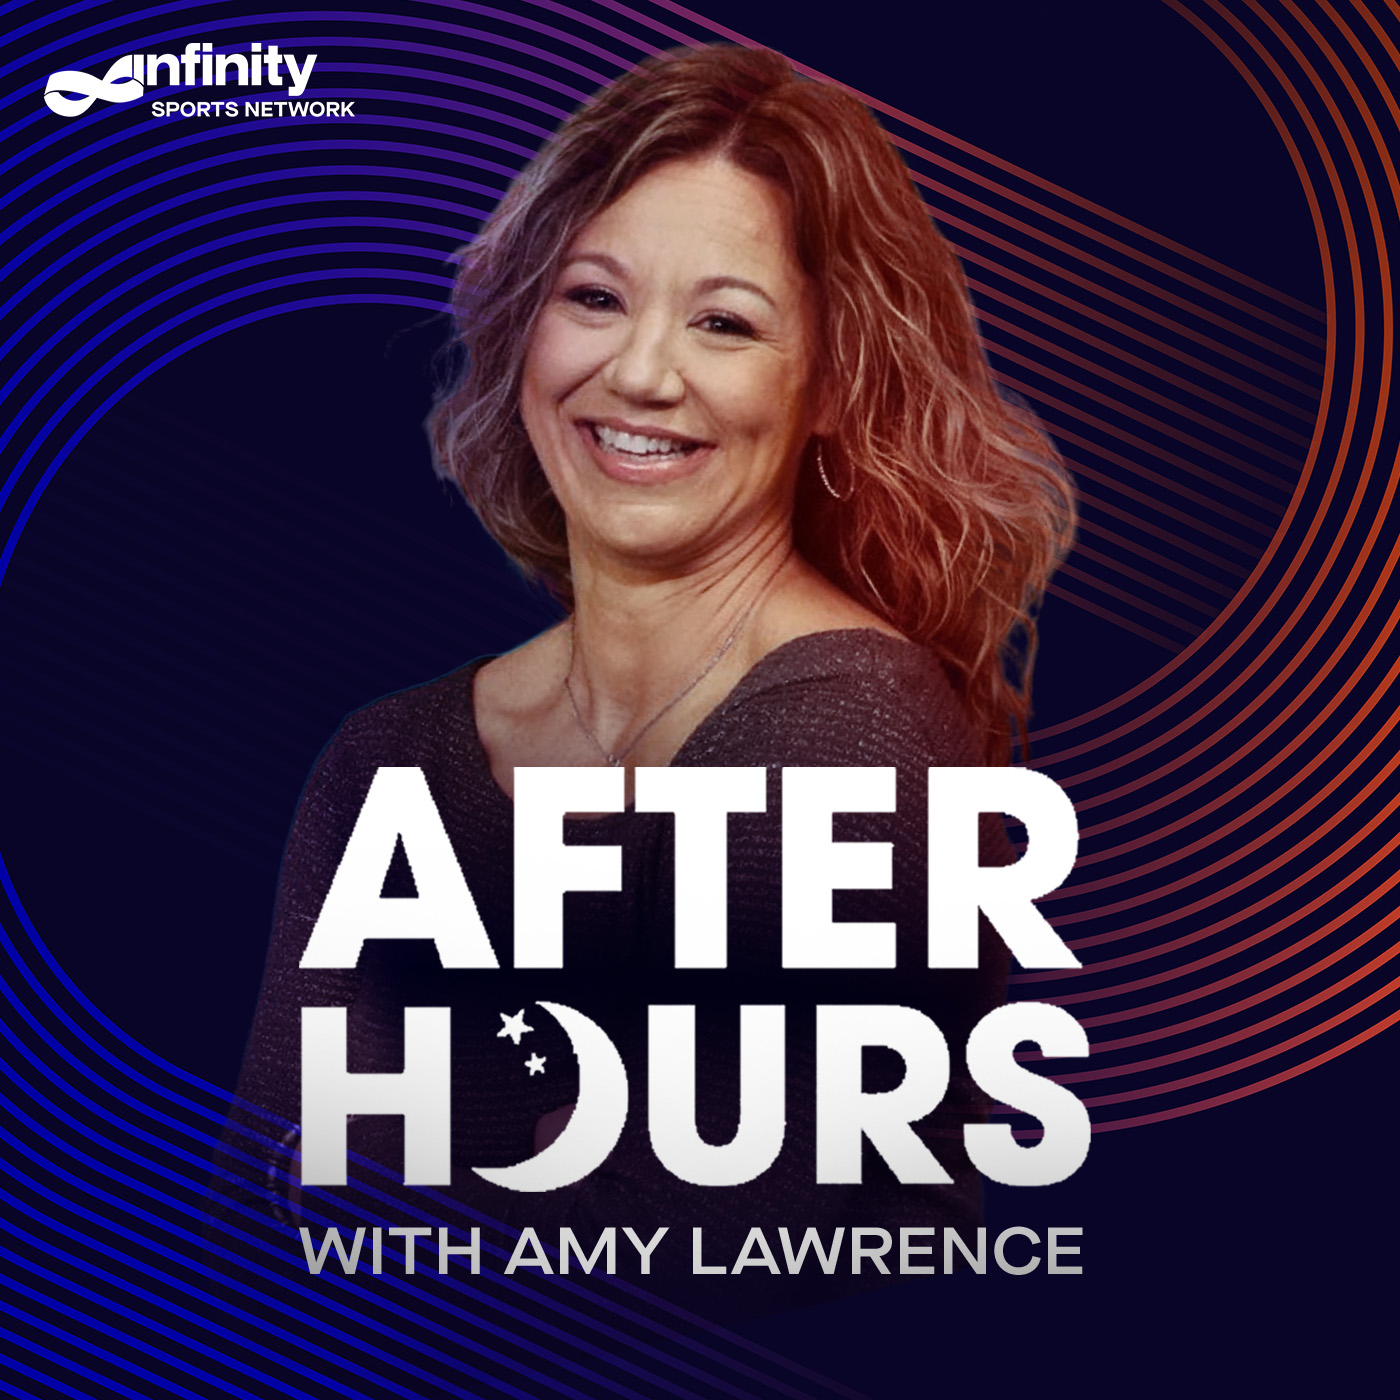 8-27-21 After Hours with Amy Lawrence PODCAST: Hour 3